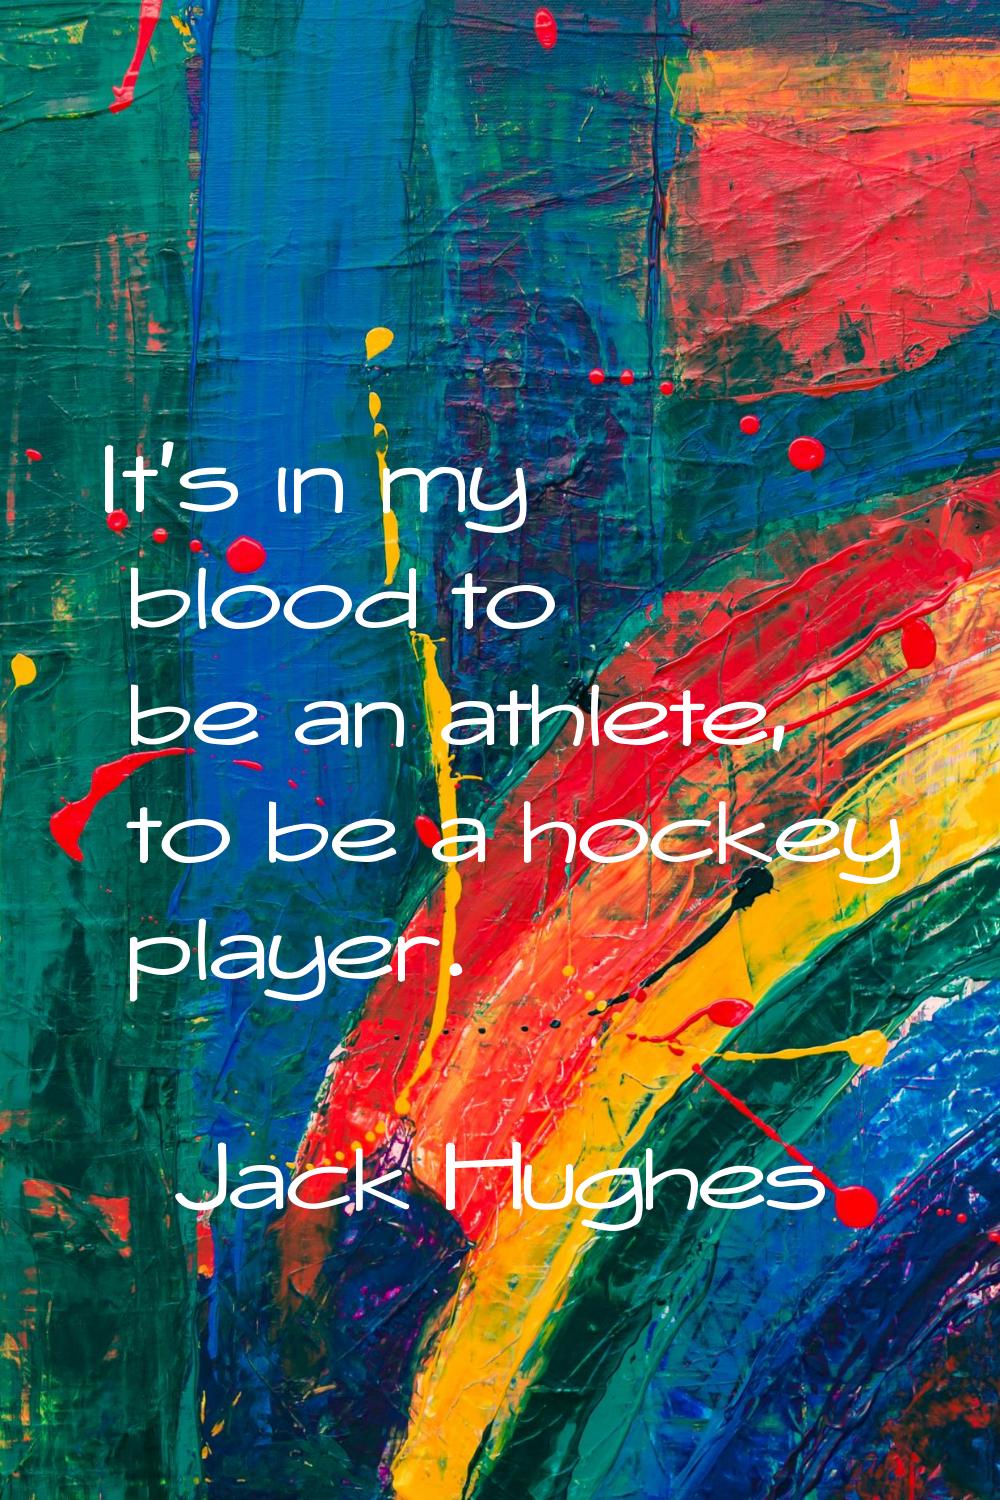 It’s in my blood to be an athlete, to be a hockey player.